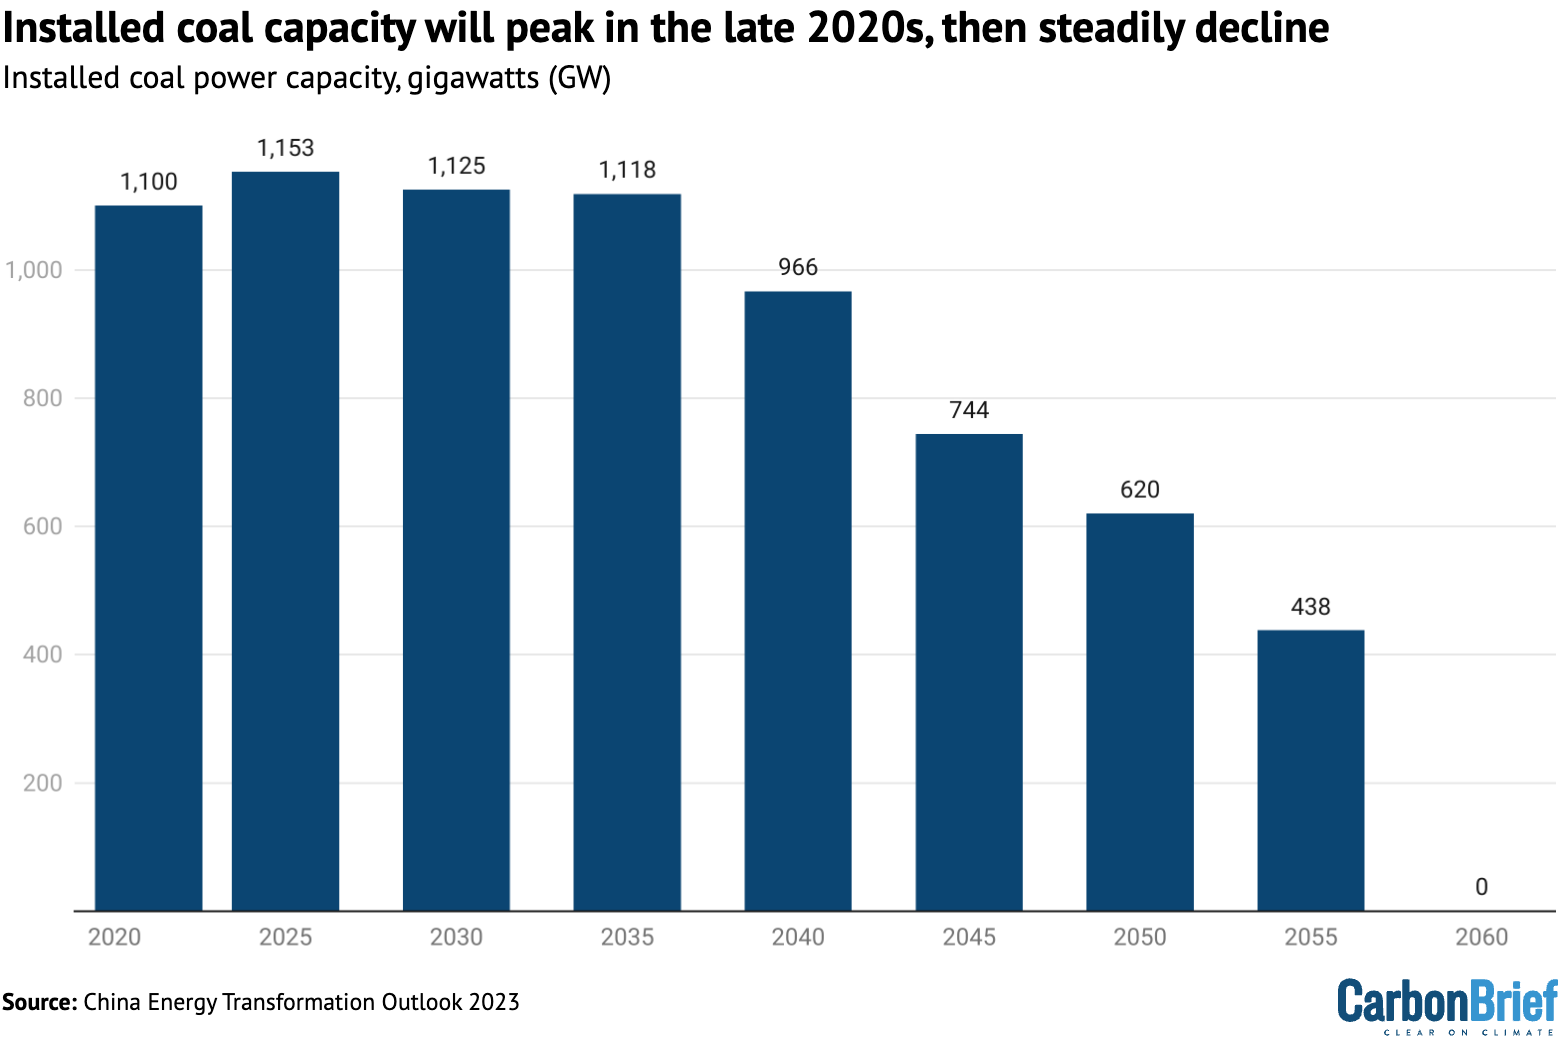 Installed coal capacity will peak in the late 2020s and steadily decline